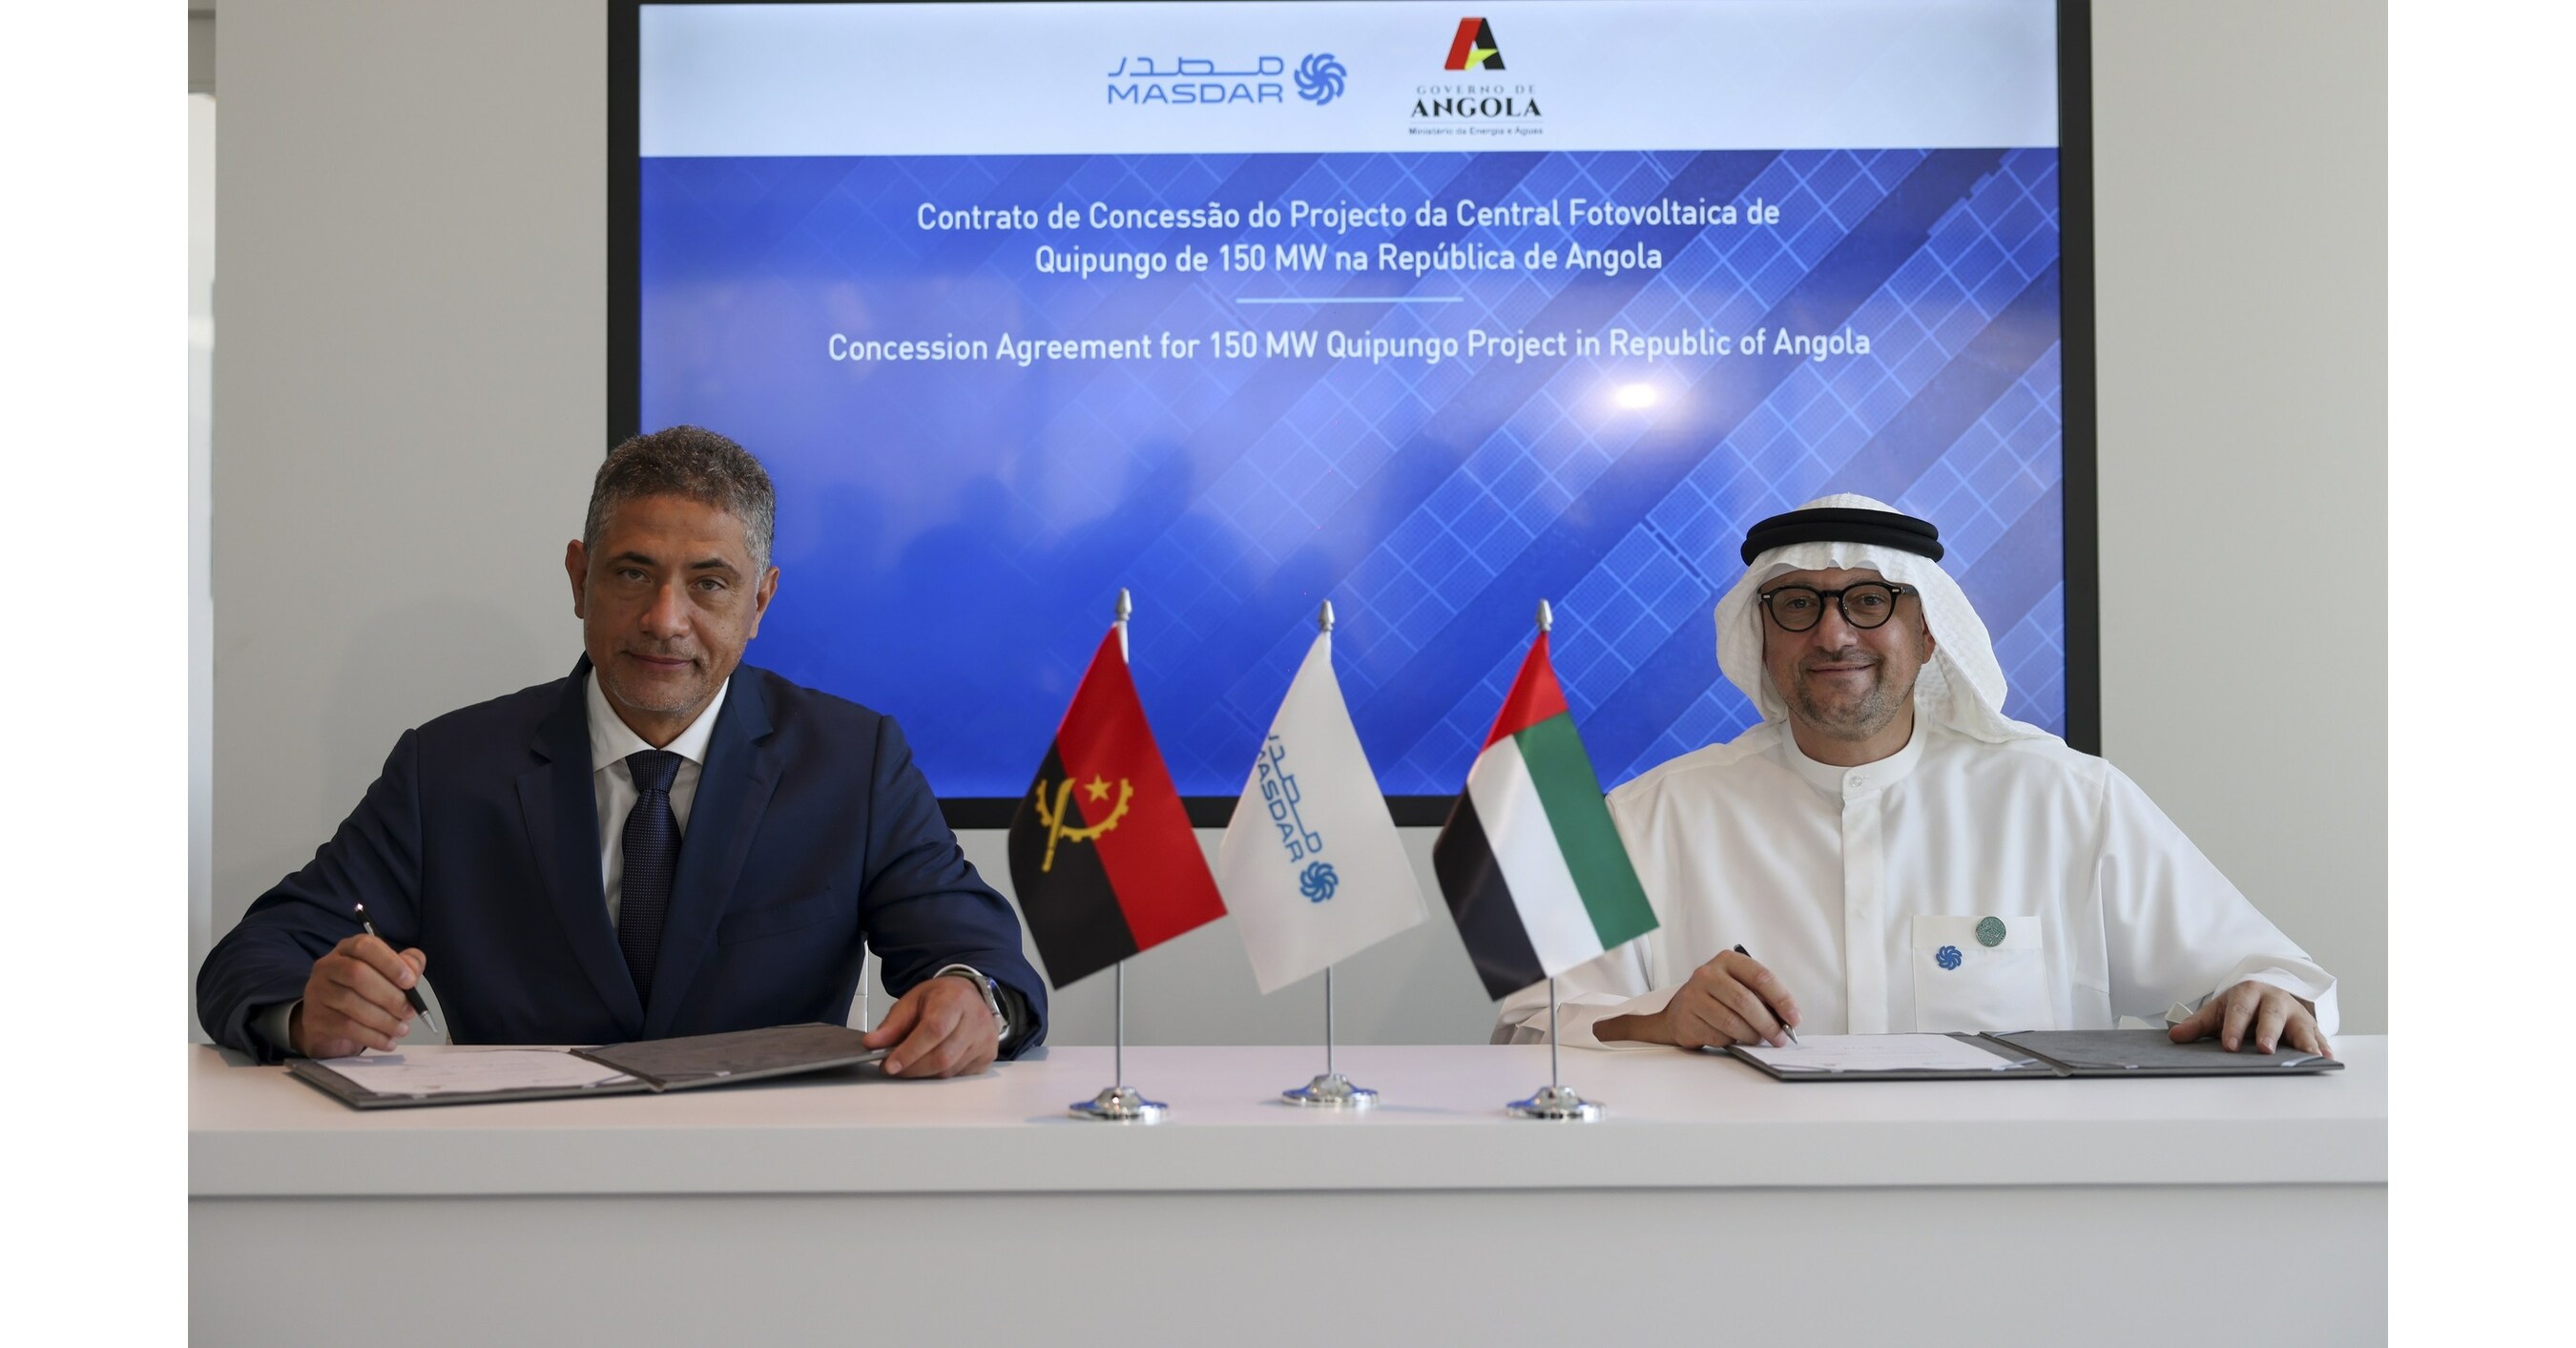 Masdar to Develop 150MWac Solar Plant in Angola to Power 90,000 Homes and Boost Just Energy Transition